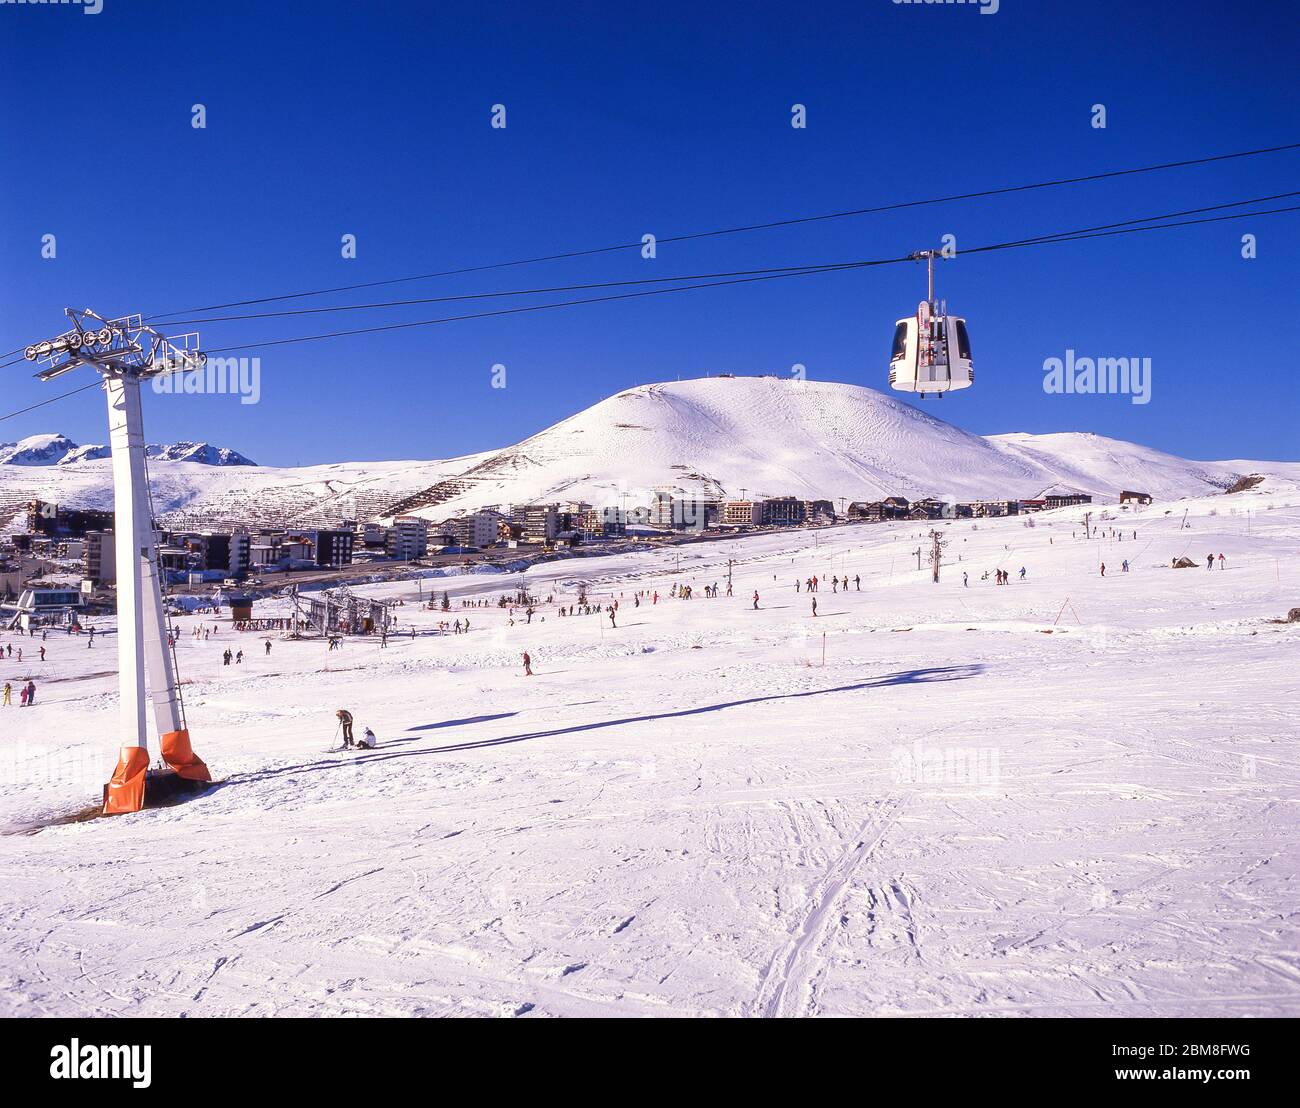 Resort view from lower slopes, Alpe d'Huez, Isere, Auvergne-Rhone-Alpes, France Stock Photo